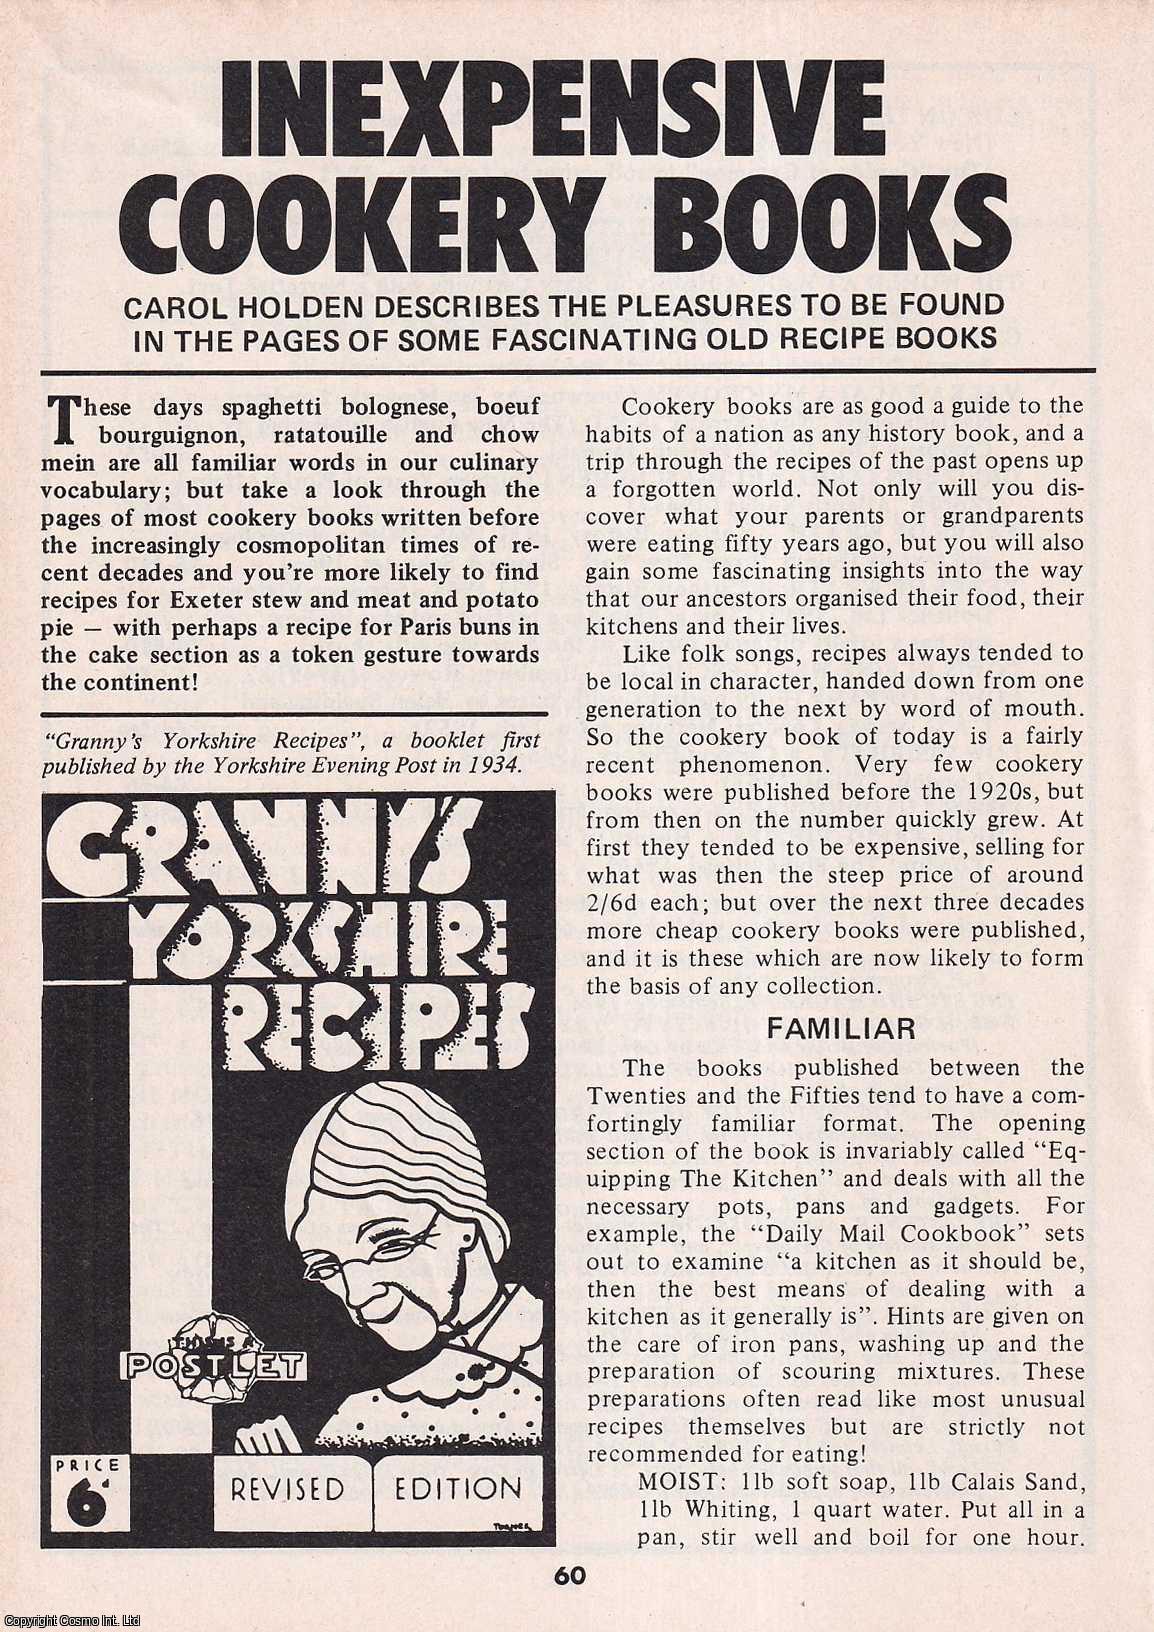 Carol Holden - Inexpensive Cookery Books : Some Fascinating Old Recipe Books. This is an original article separated from an issue of The Book & Magazine Collector publication.